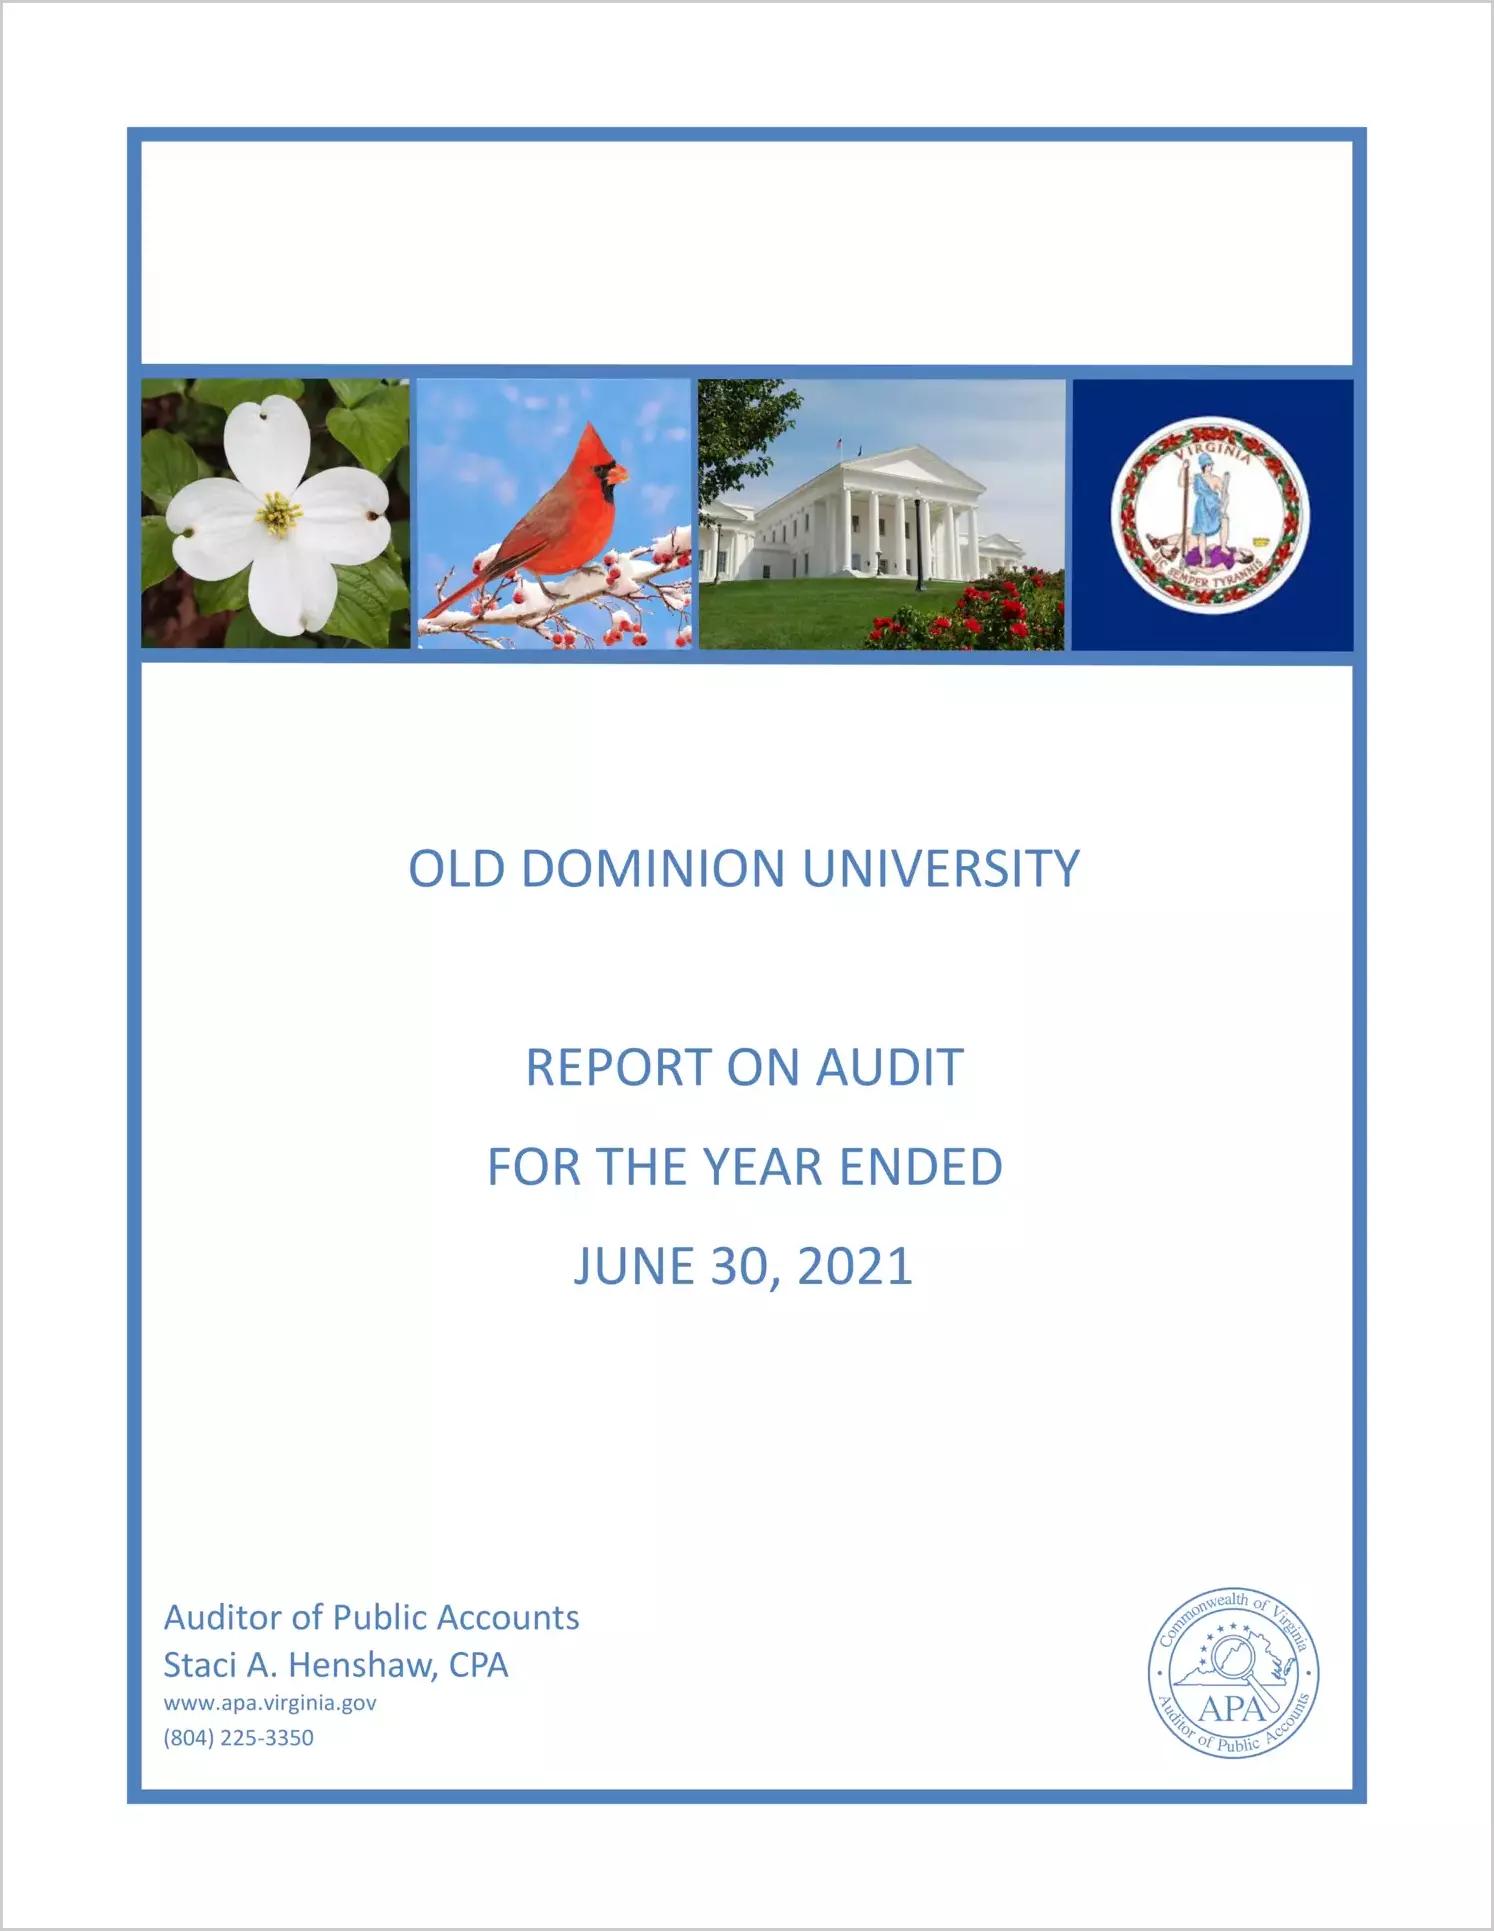 Old Dominion University for the year ended June 30, 2021